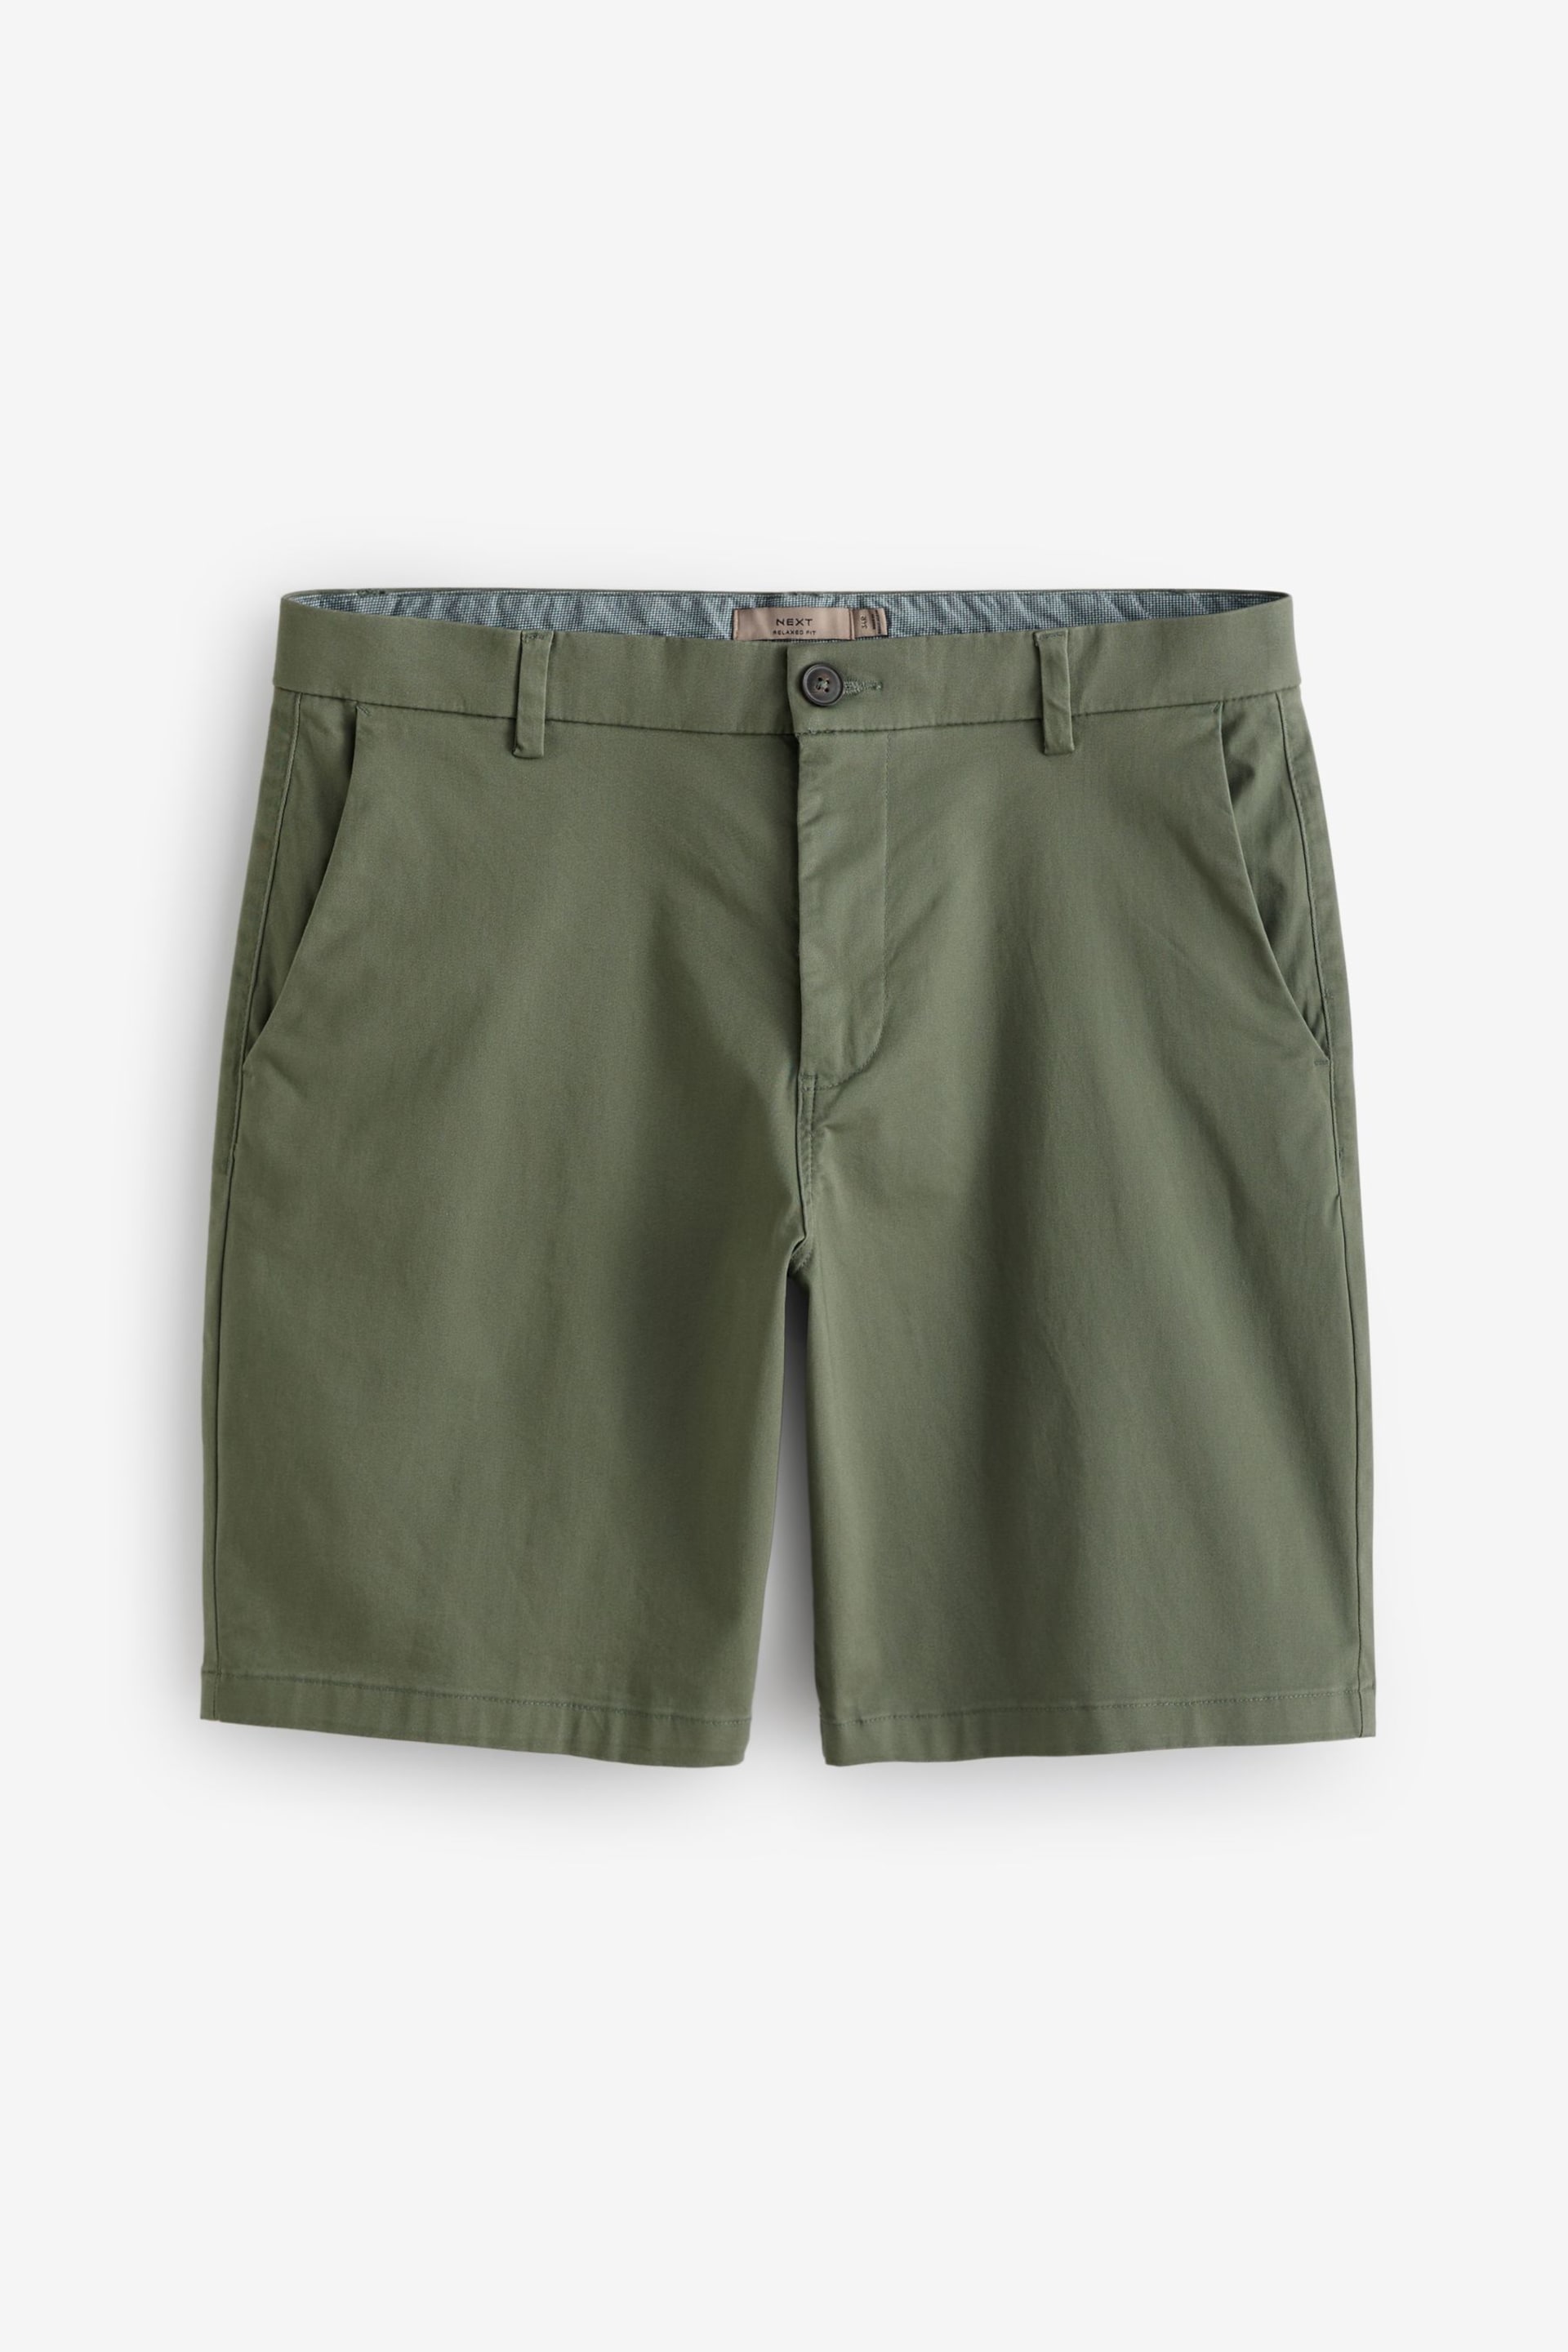 Sage Green Loose Fit Stretch Chinos Shorts - Image 5 of 8